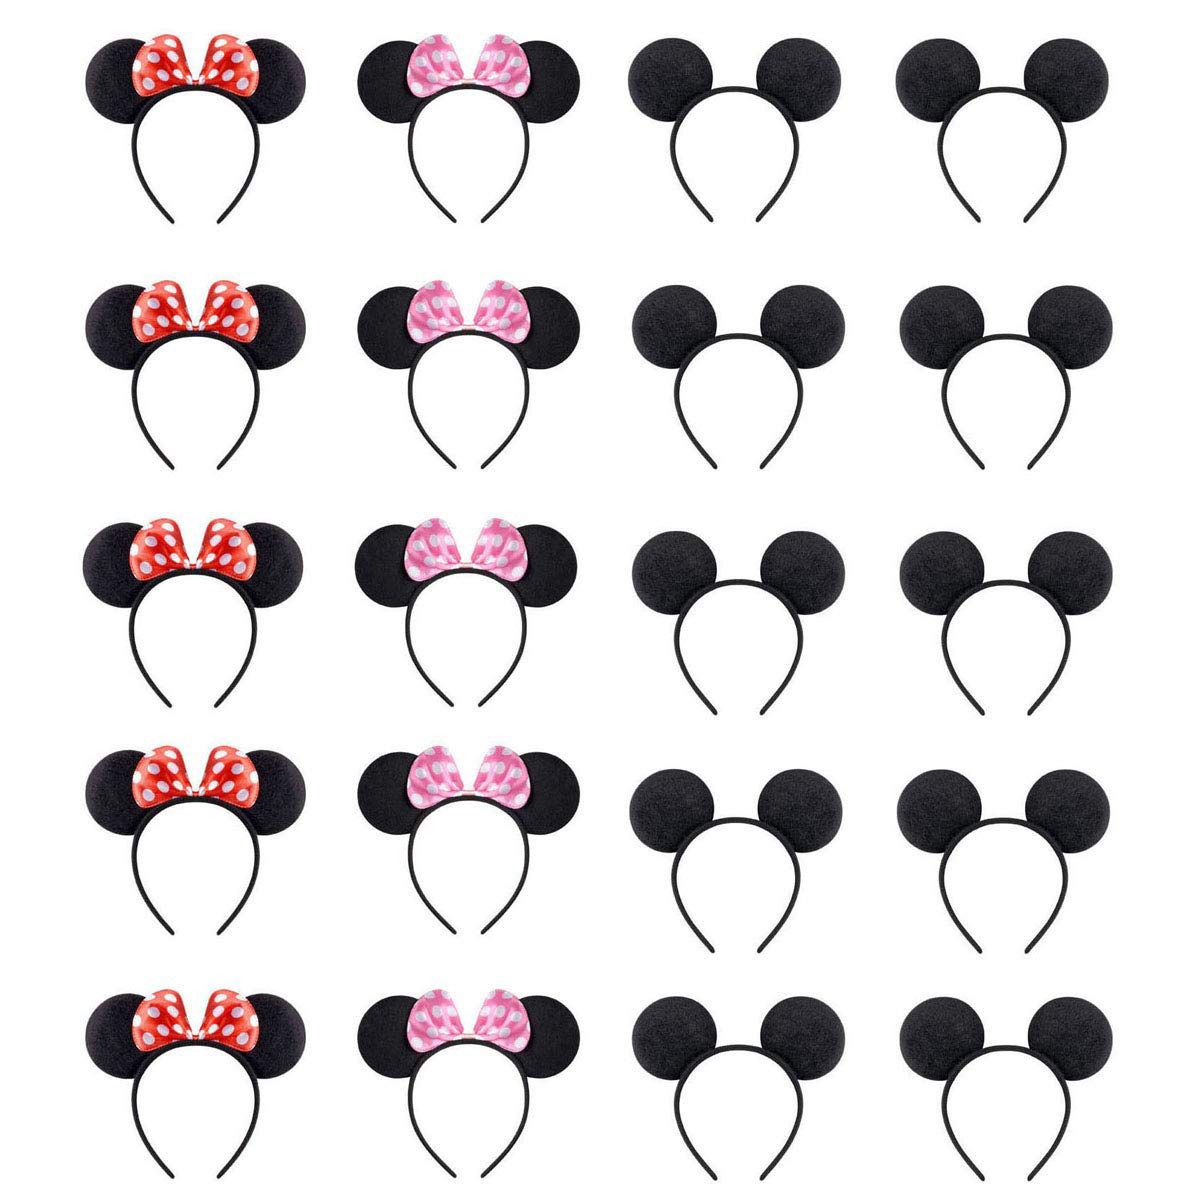 20 PCS Mouse Ears For Birthday Party Theme Park Costume Play Celebration For Boys And Girls …